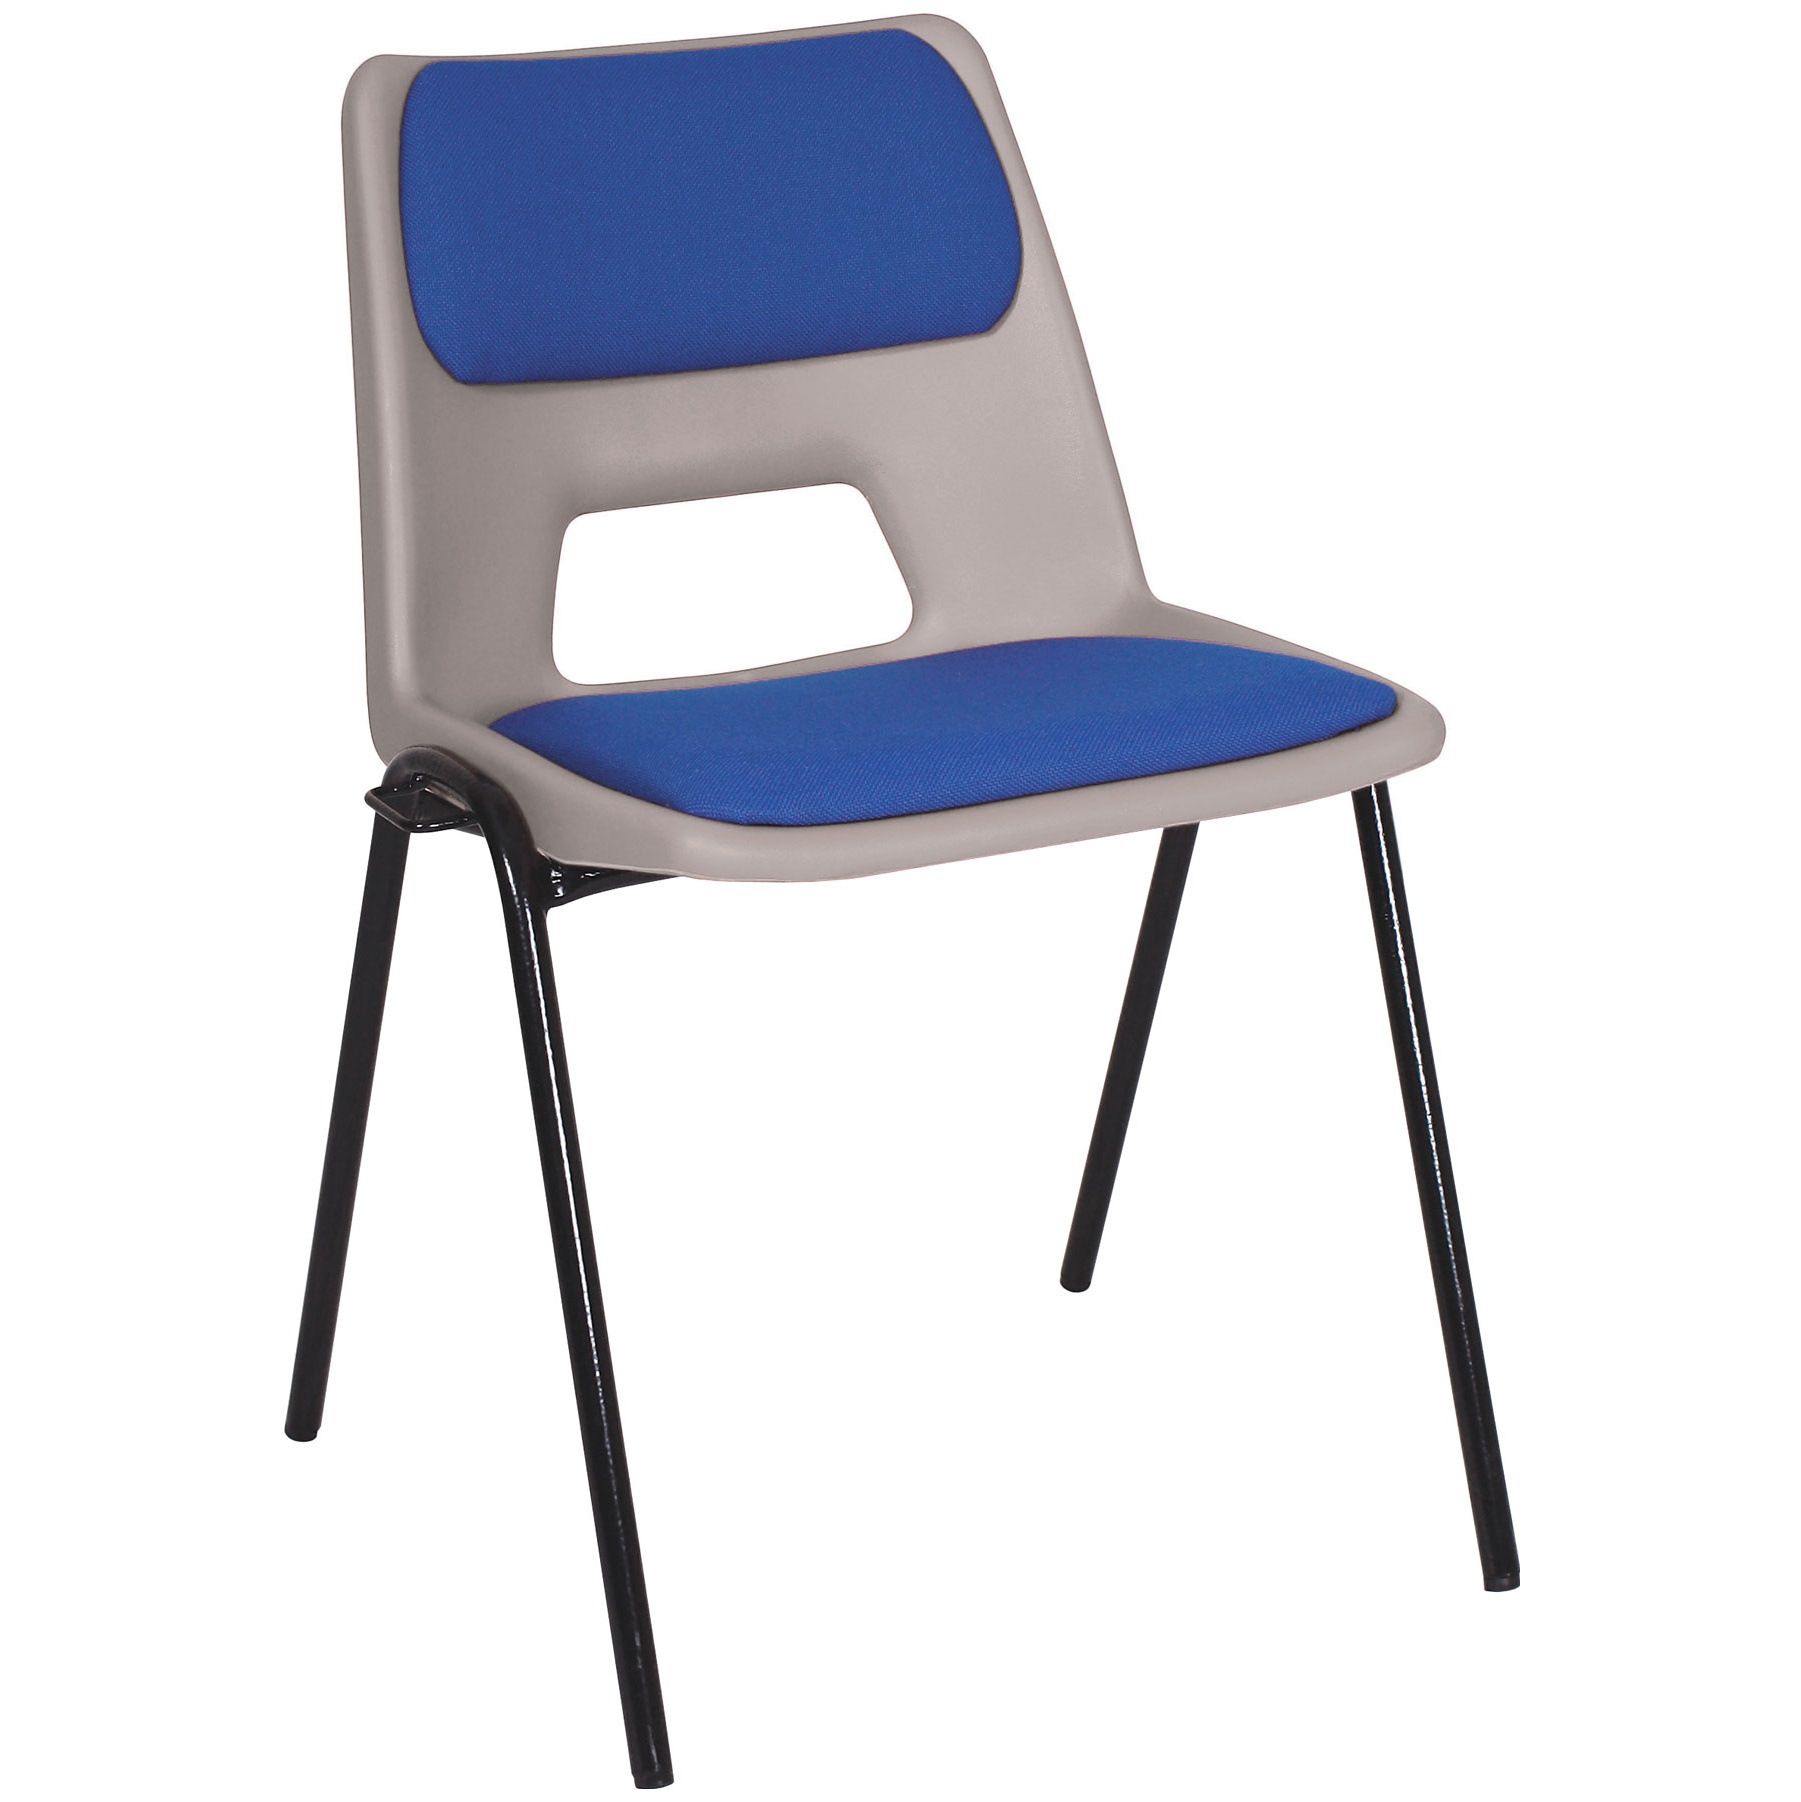 Scholar Padded Polypropylene Chairs Classroom Chairs